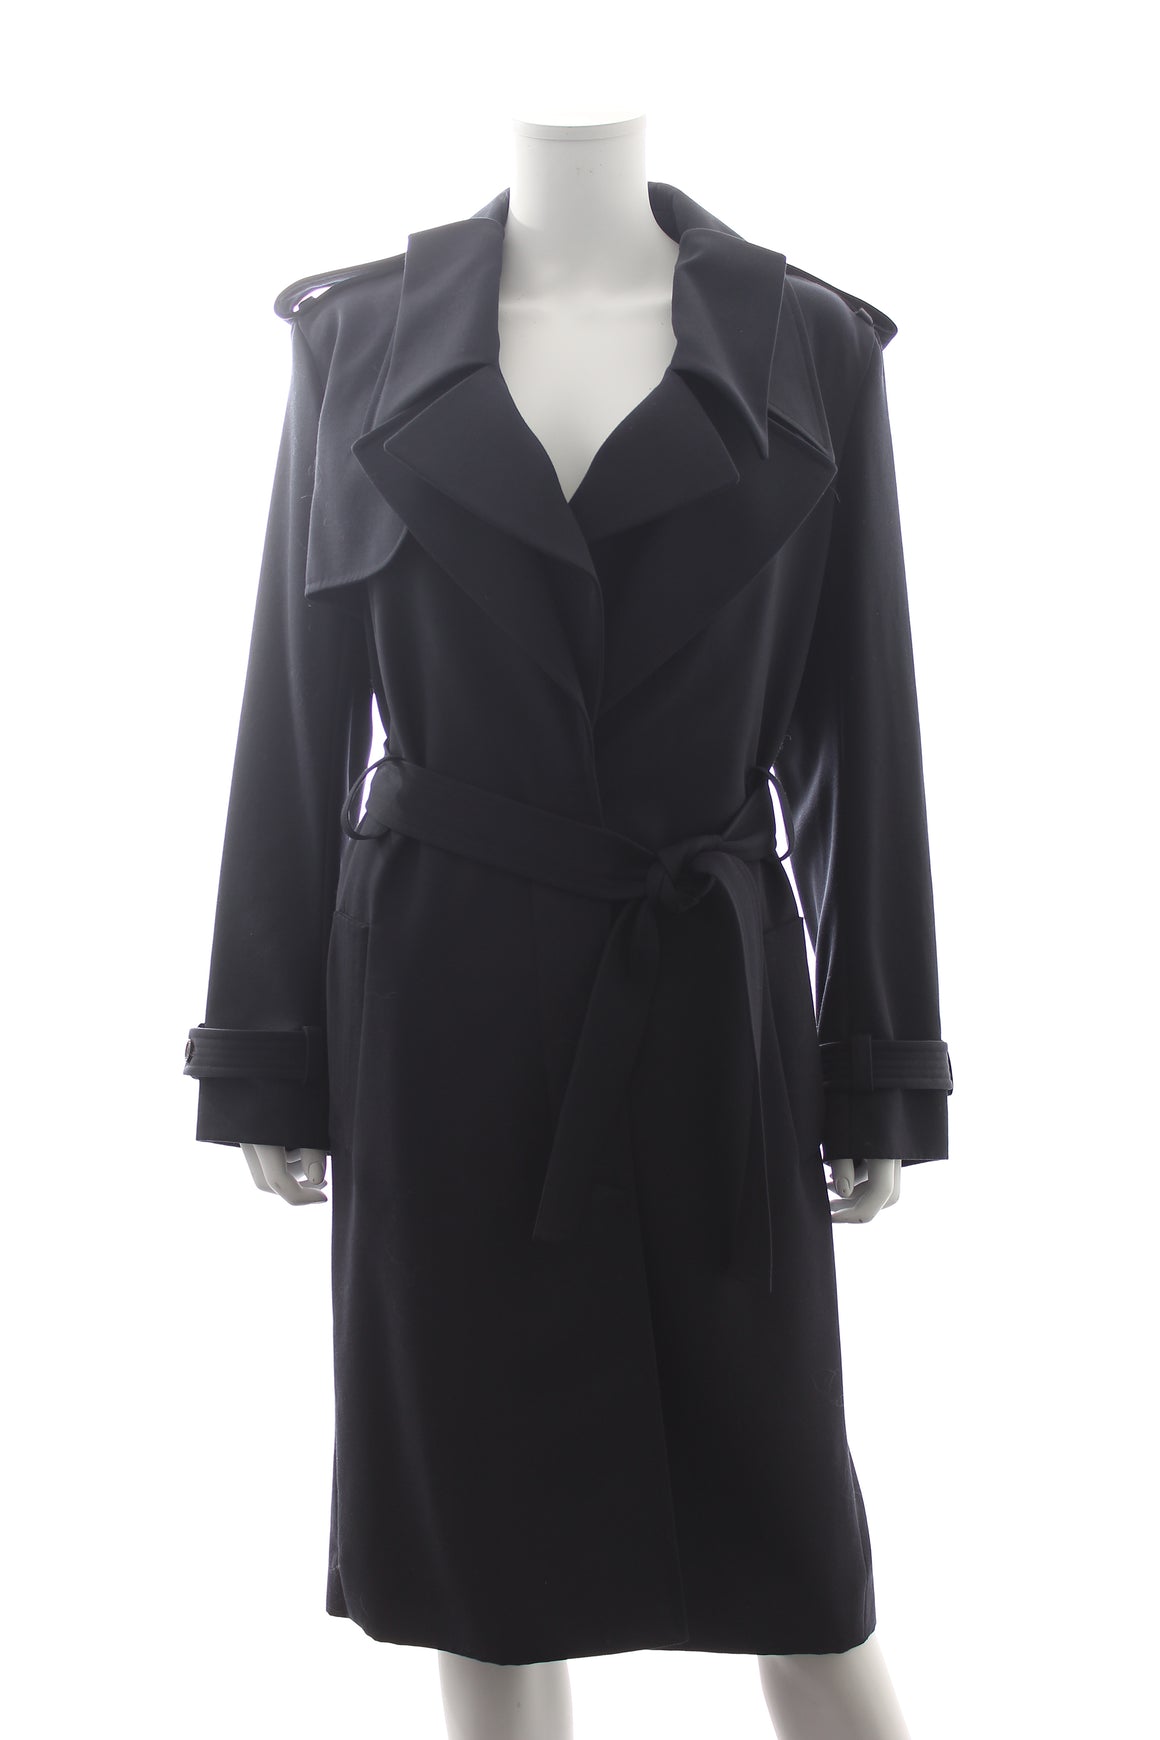 Chloe Belted Wool Trench-Style Coat